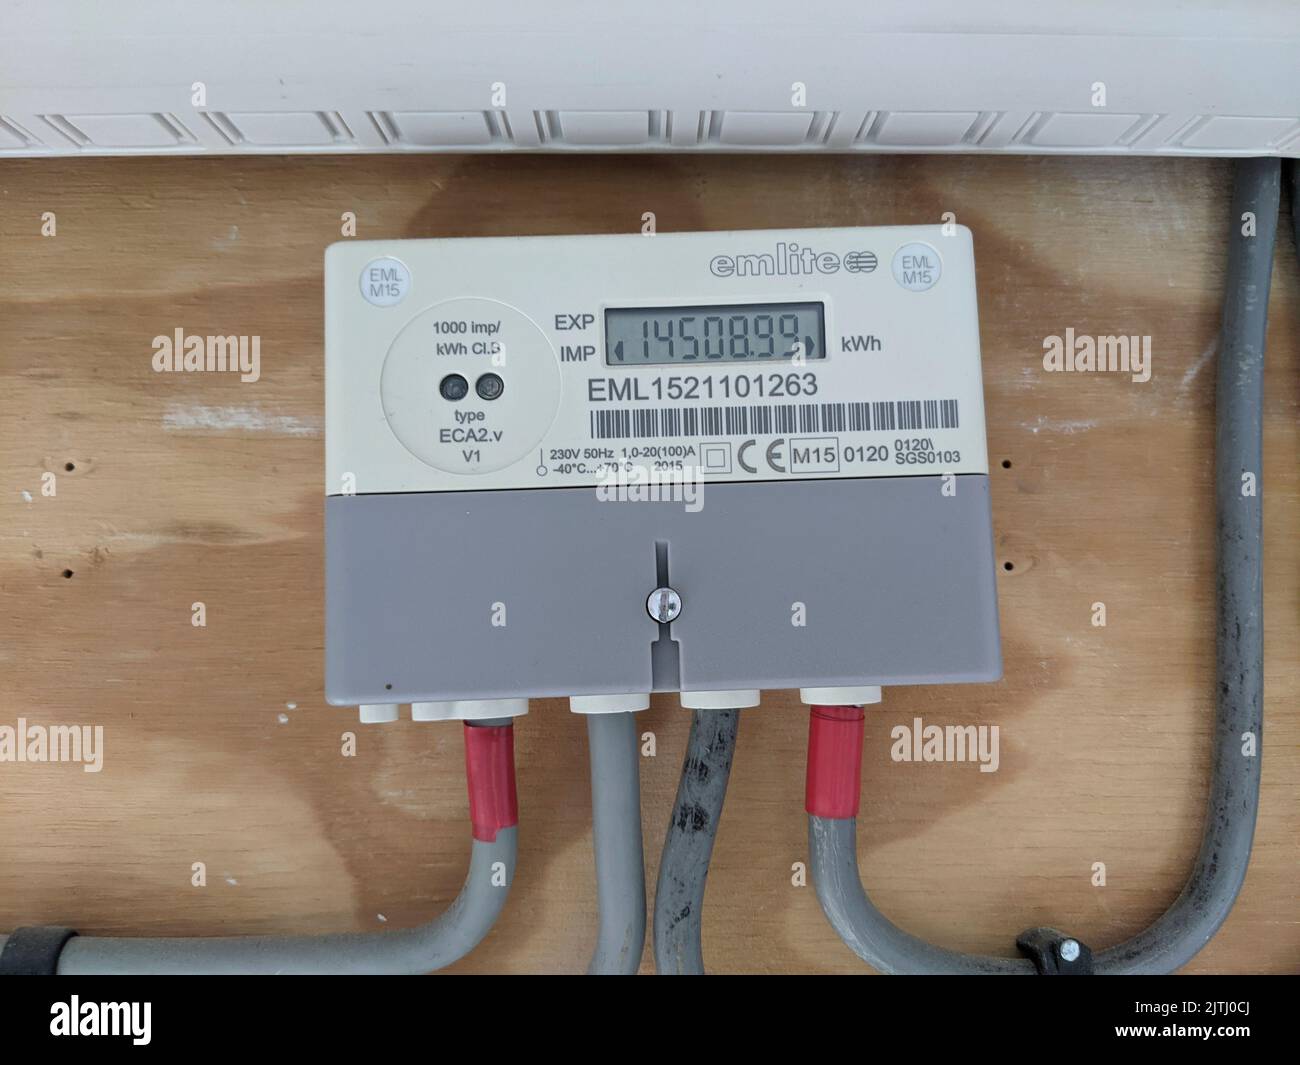 Digital electric meter showing electricity use in kilowatt hours (kWh) - on a test board Stock Photo